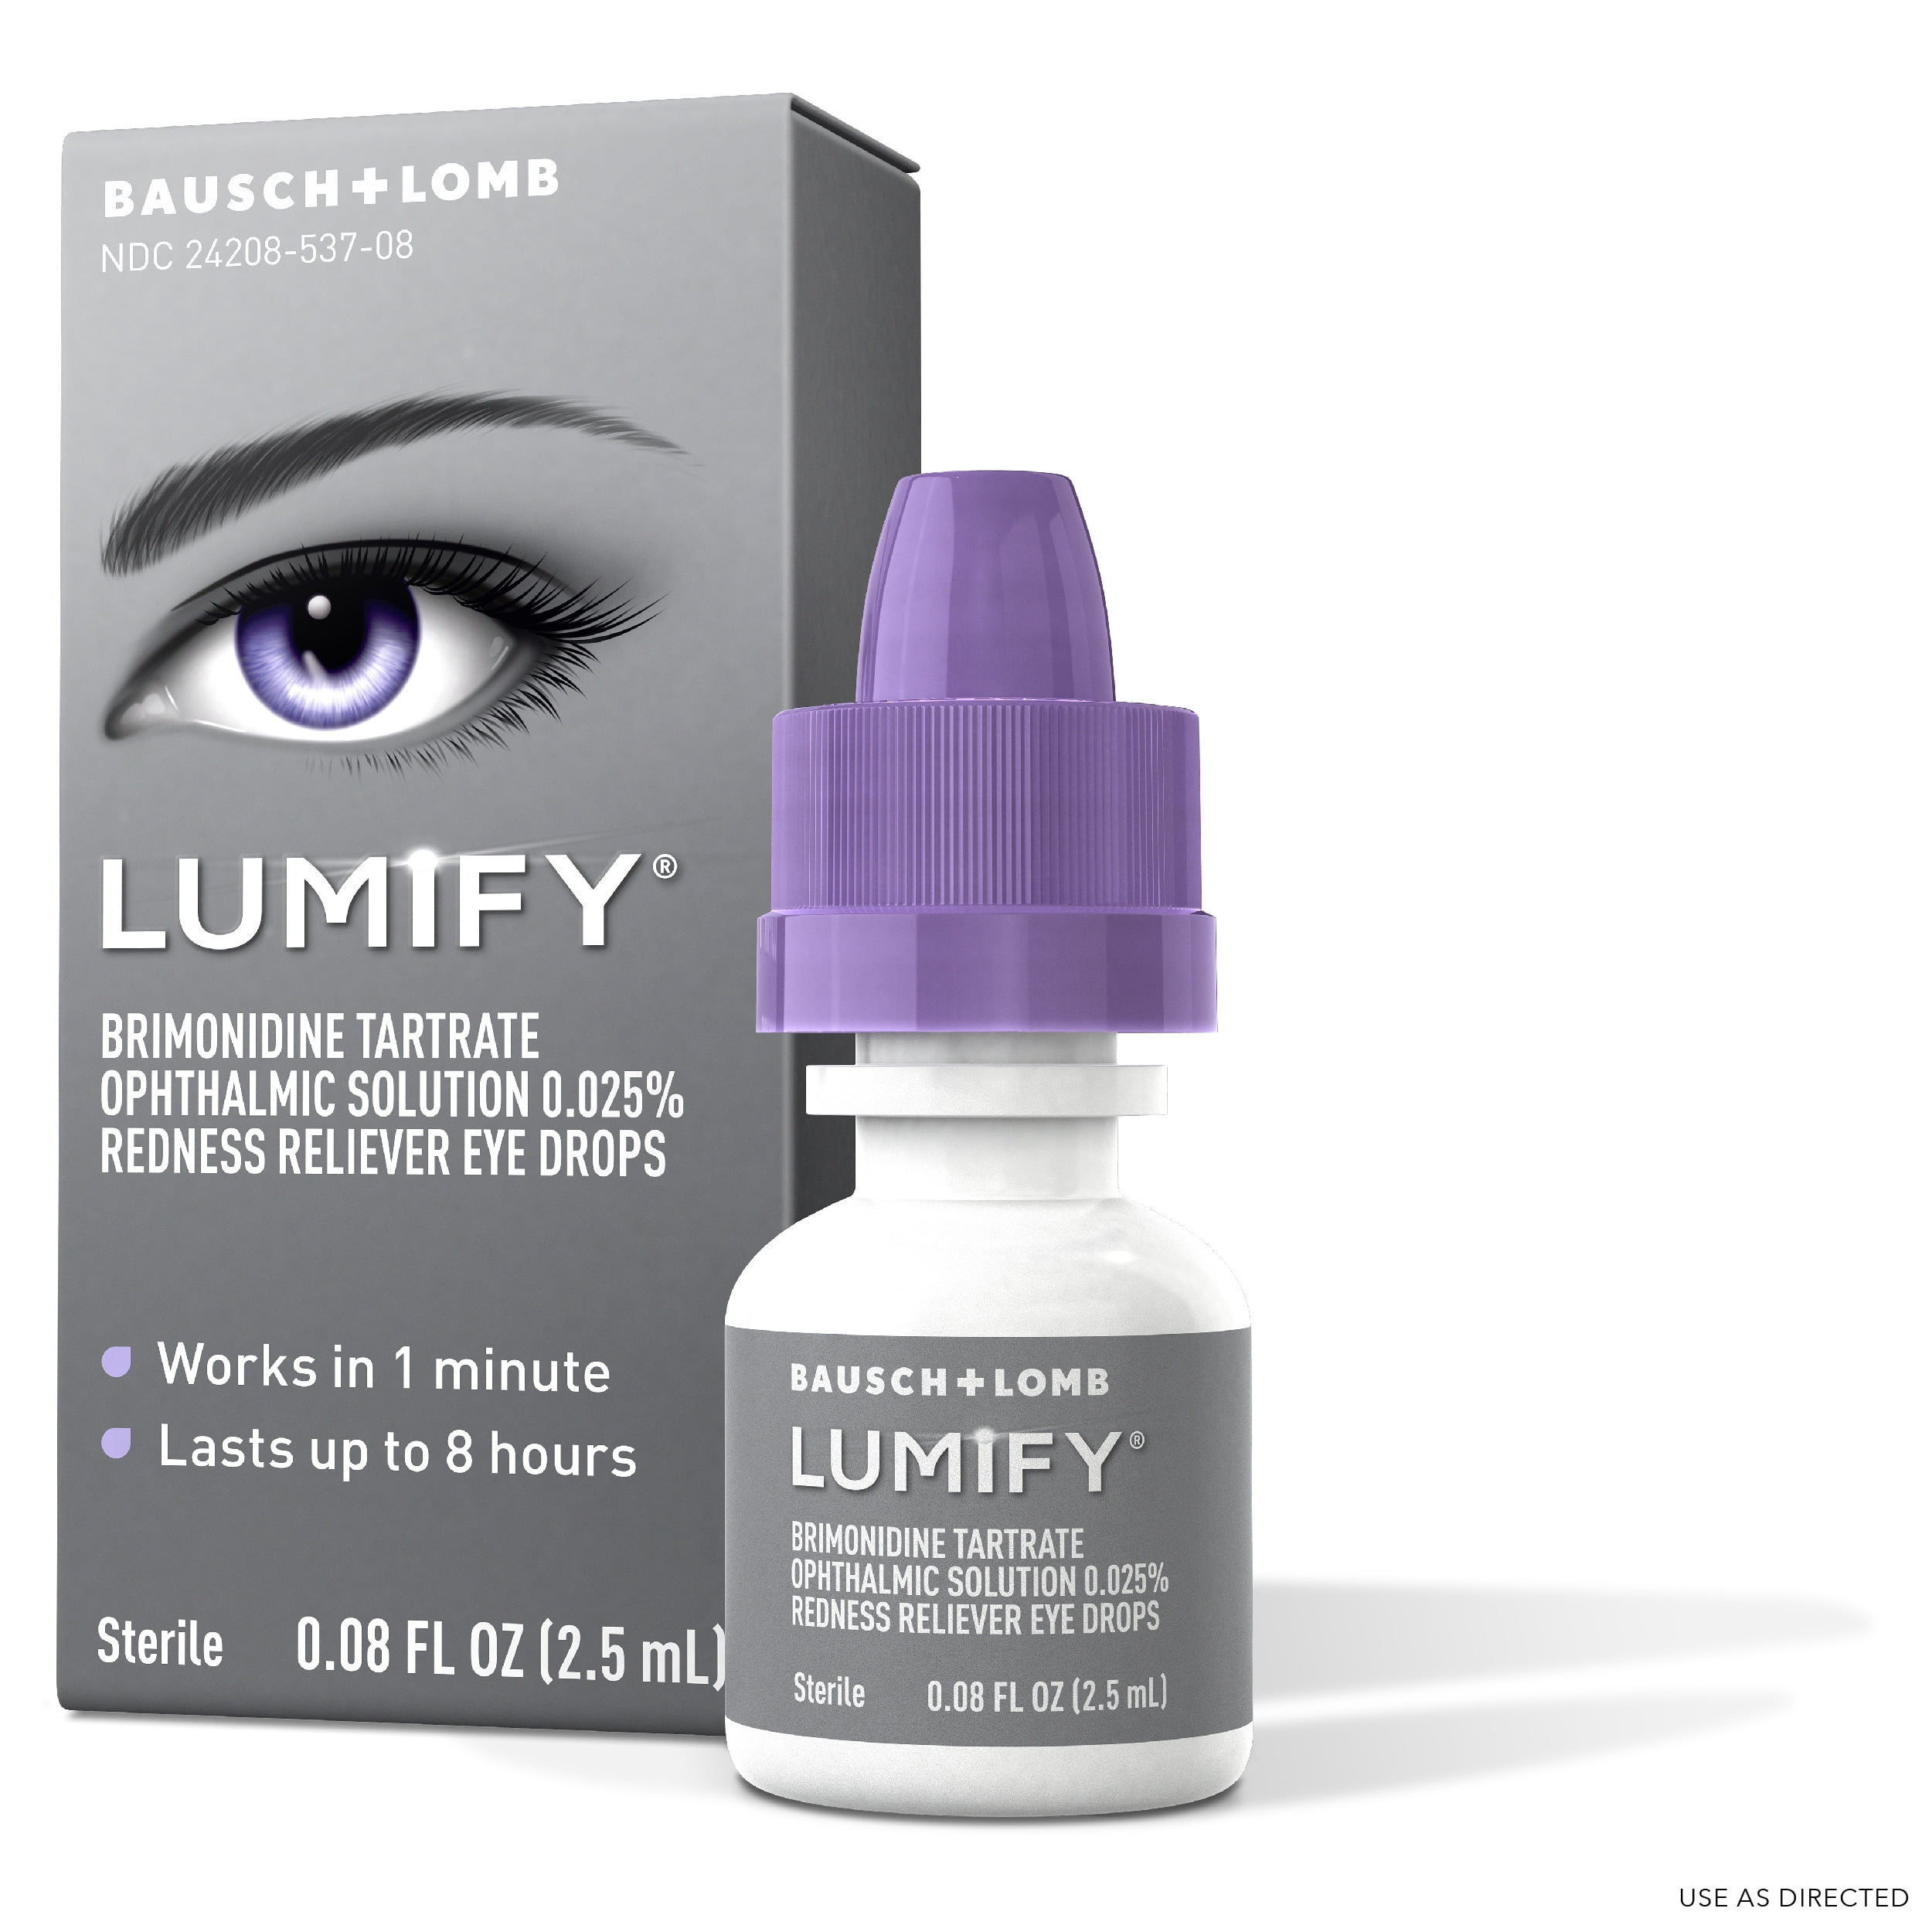 LUMIFY Redness Reliever Eye Drops (Brimonidine Tartrate Ophthalmic Solution 0.025%)  from Bausch + Lomb, 0.08 Fl. Oz. (2.5 mL)